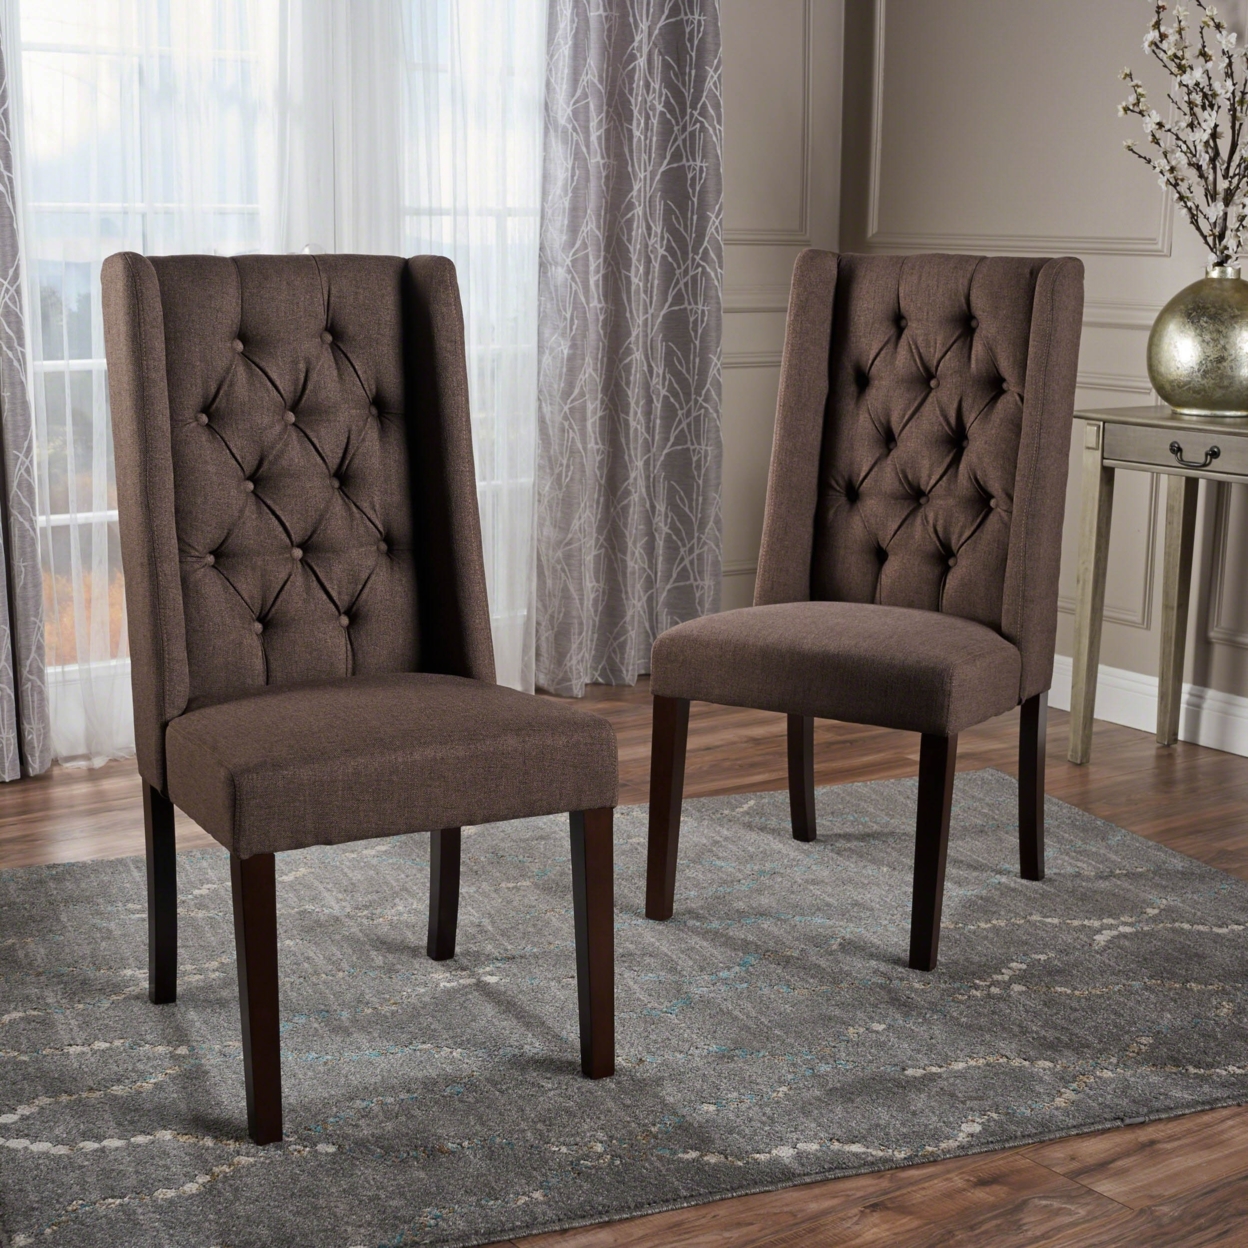 Billings Tufted Fabric High Back Dining Chairs (Set Of 2) - Dark Gray